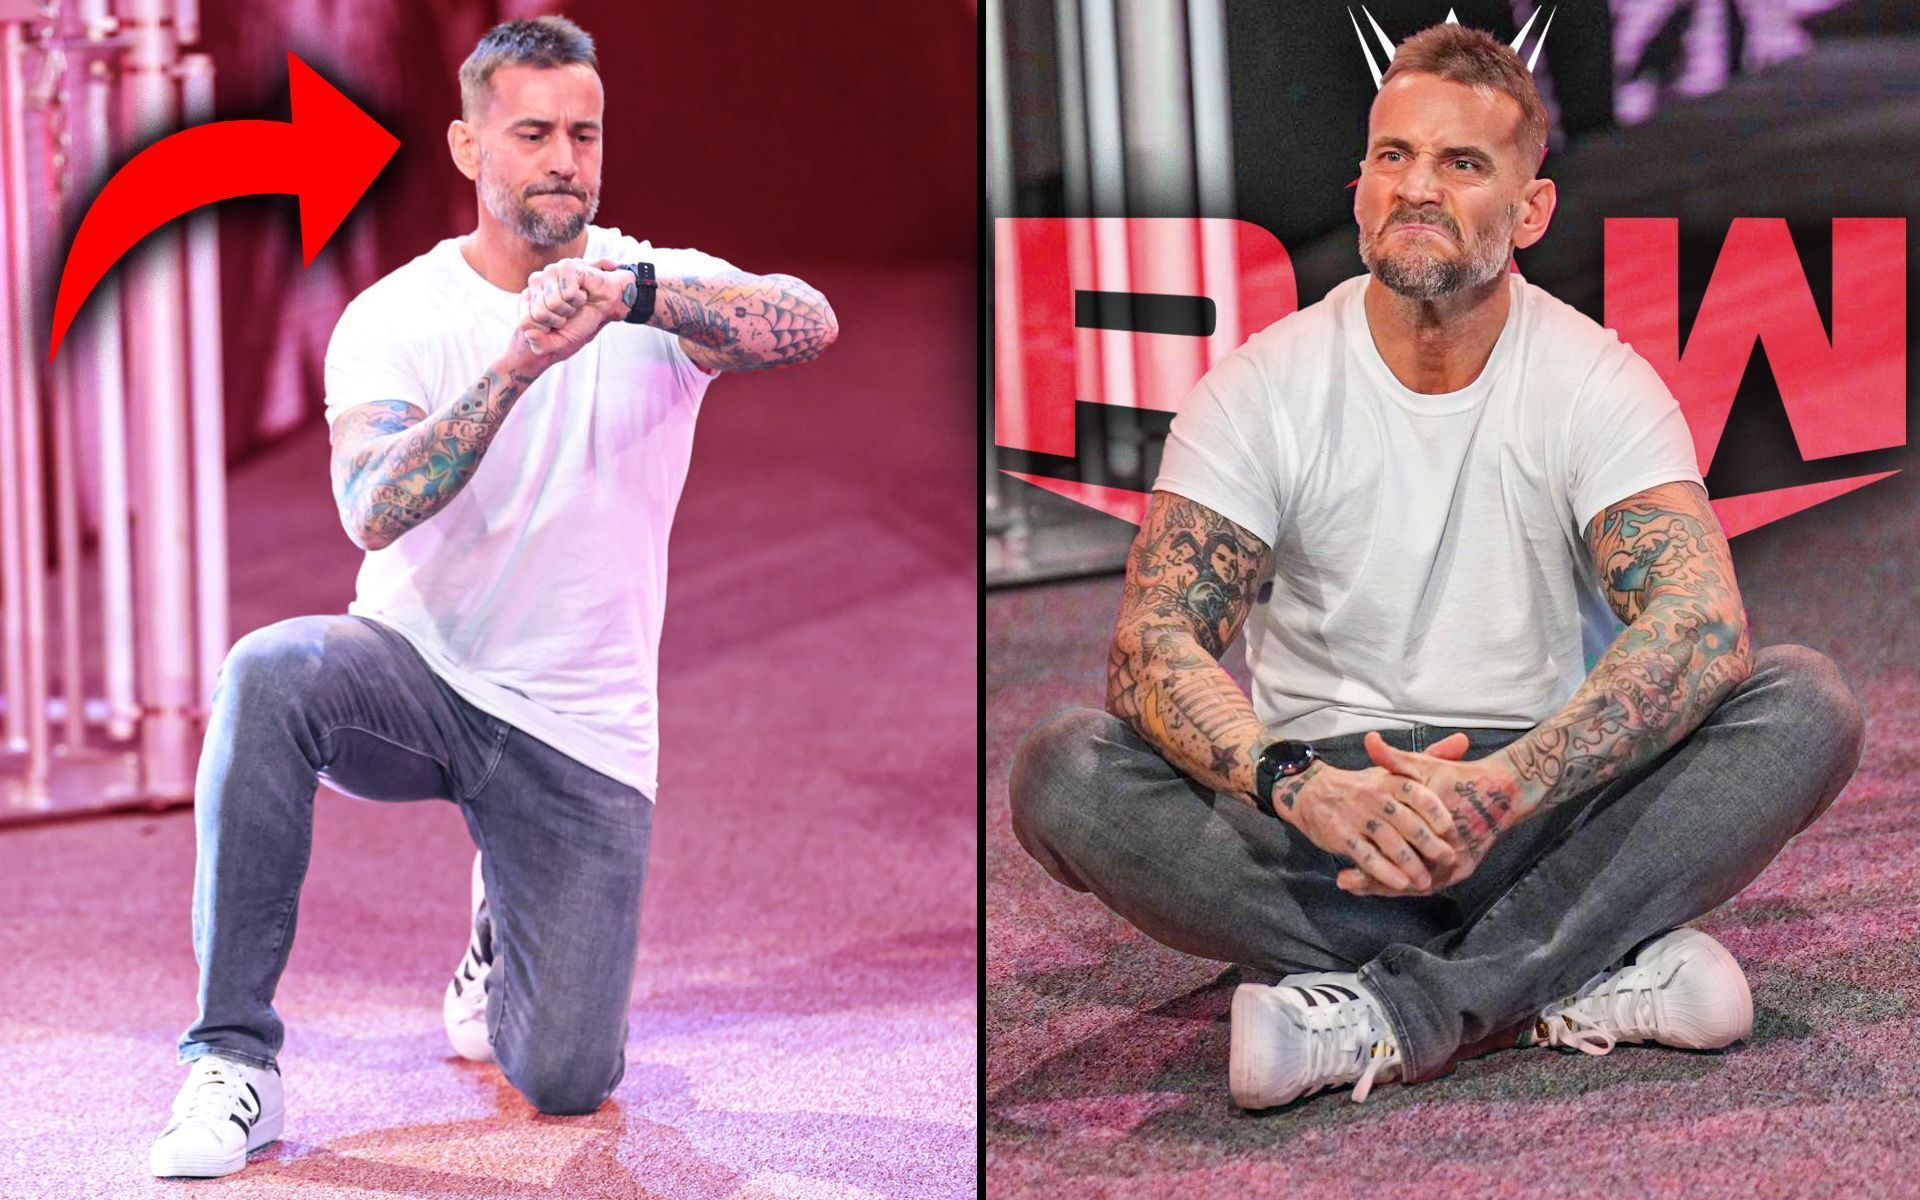 CM Punk is expected to appear on the upcoming edition of WWE RAW.